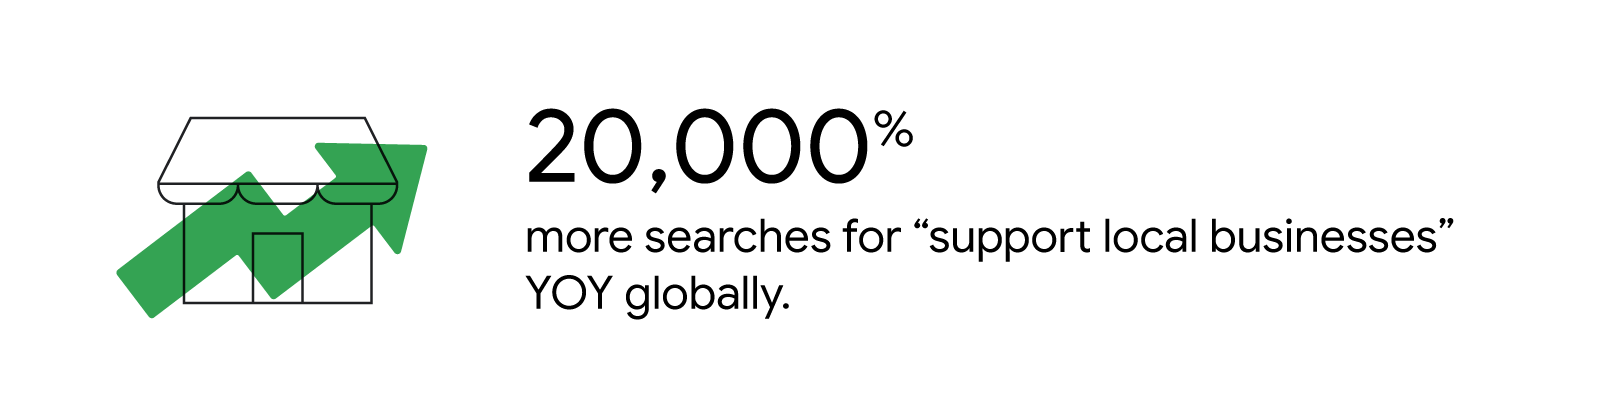 Multi-Location Marketing - support local business searches increase 20,000%